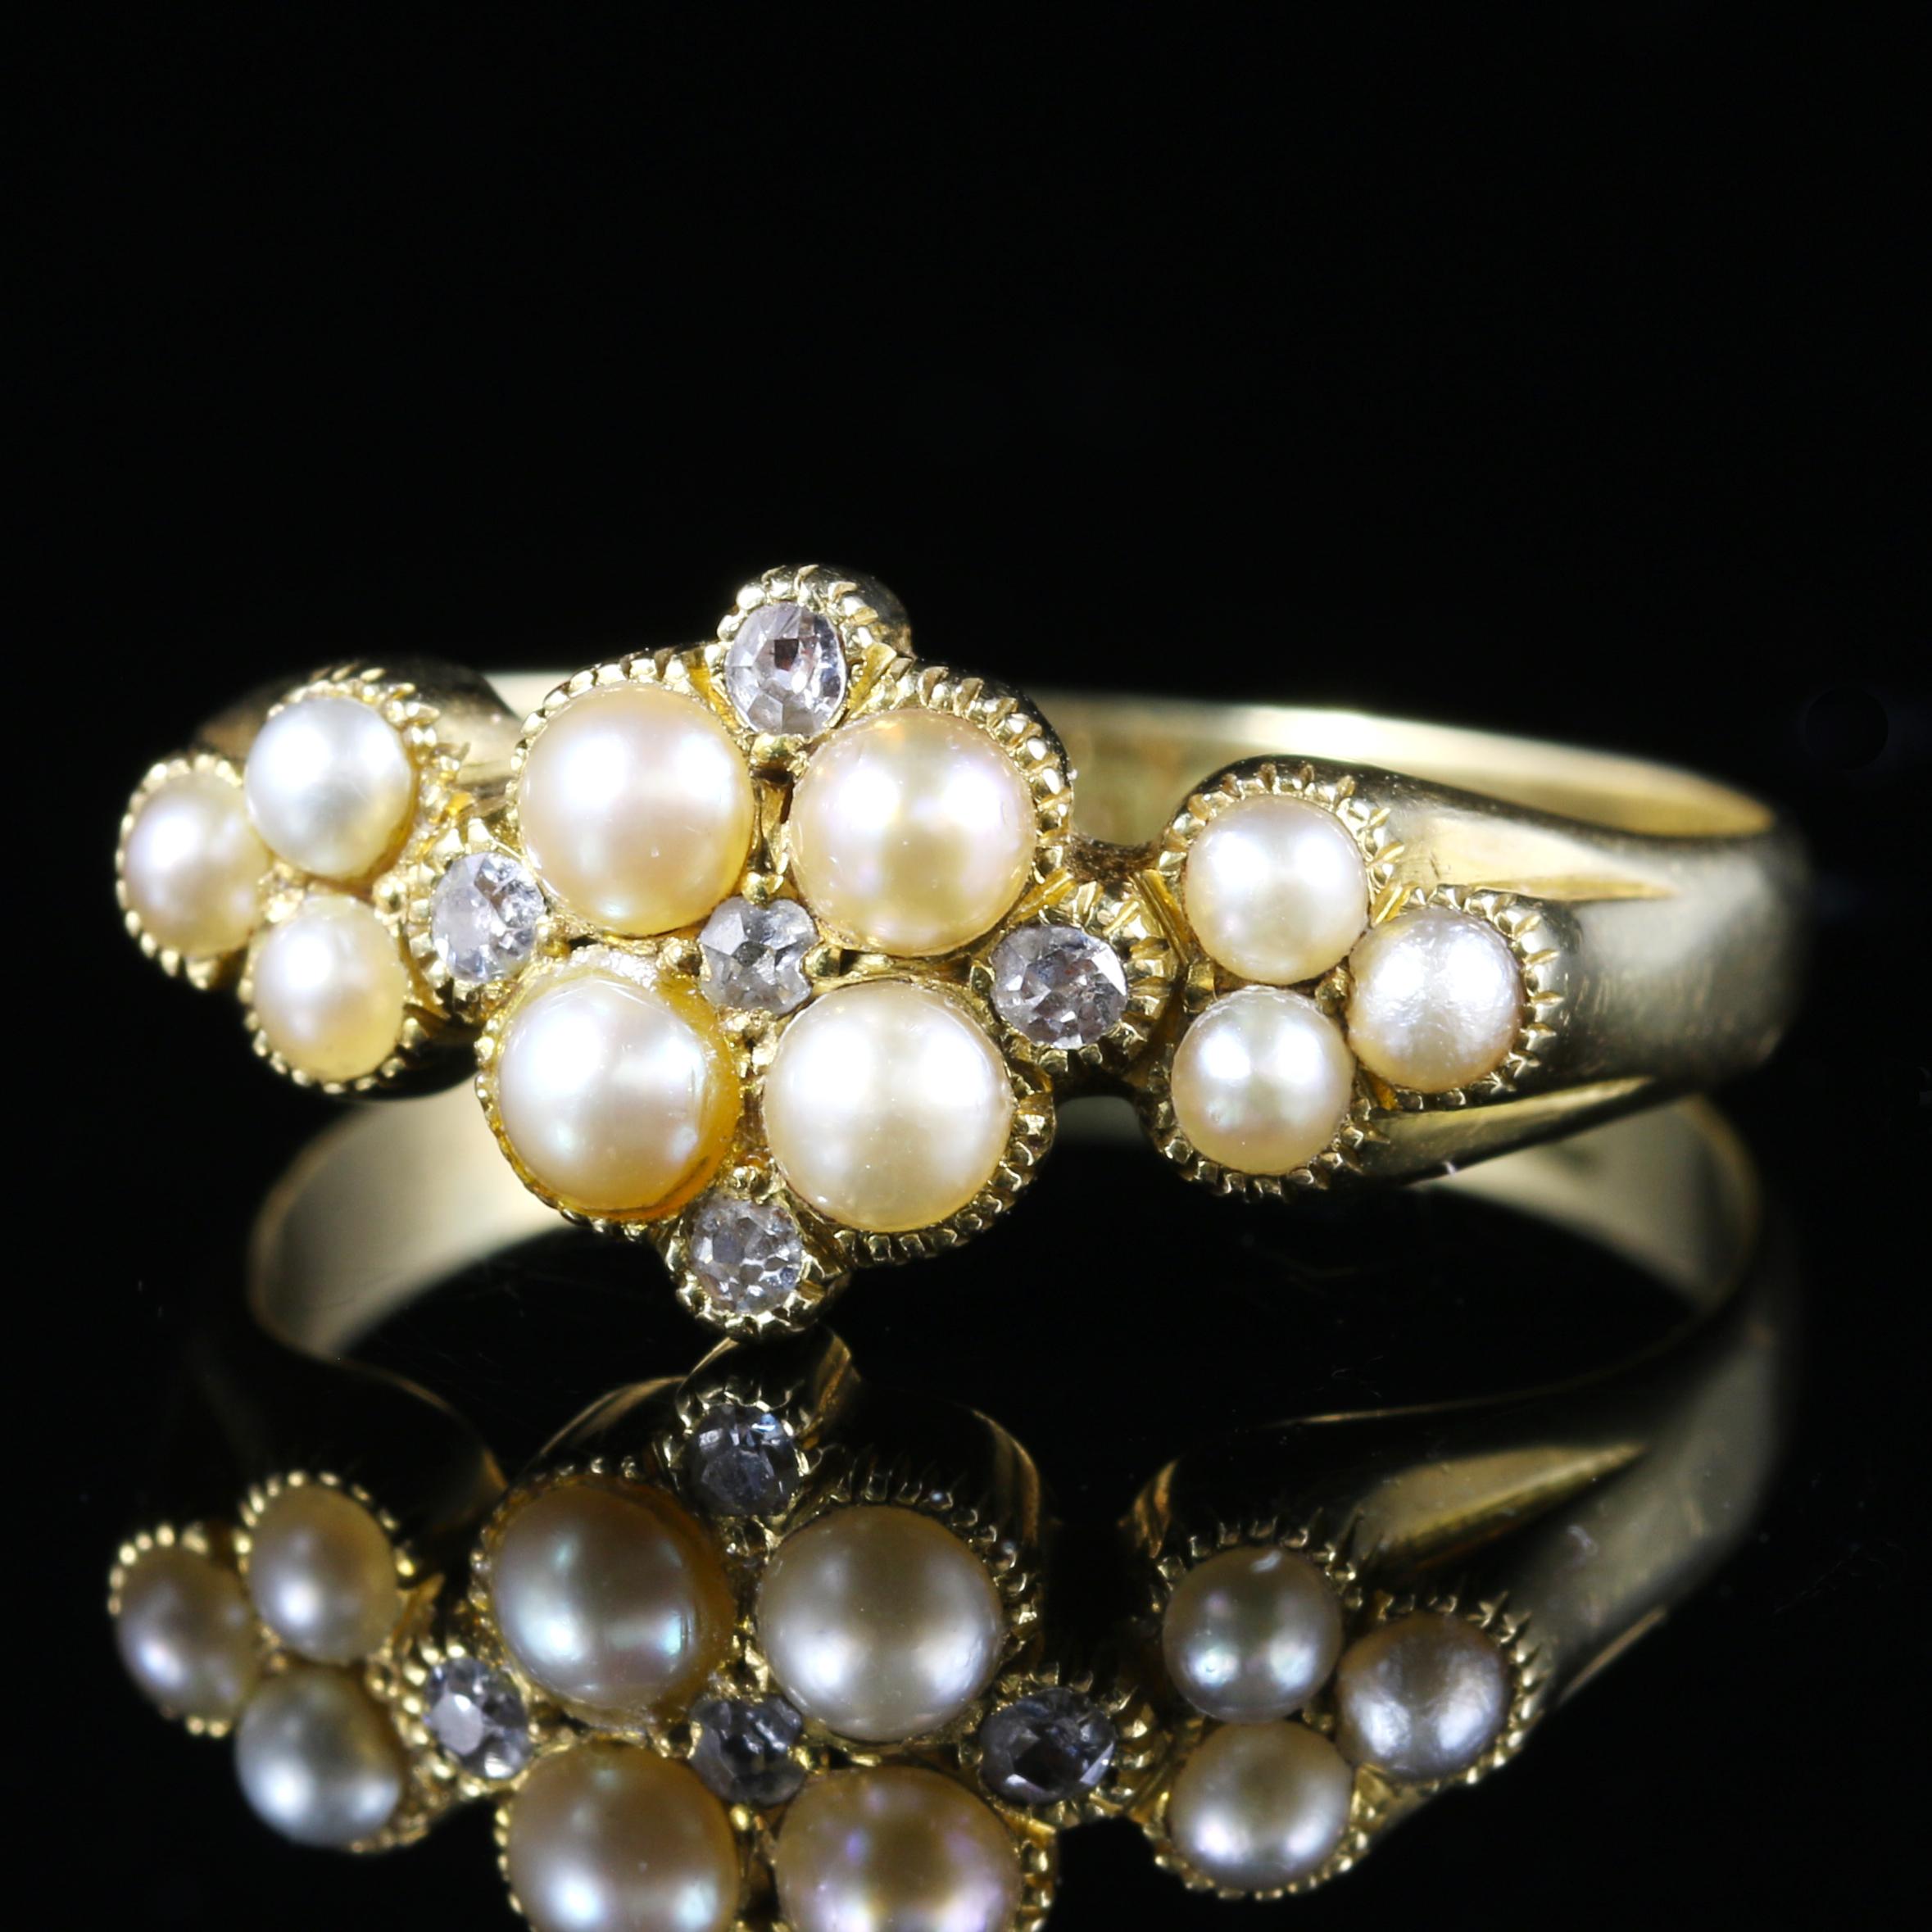 Women's Antique Victorian Pearl and Diamond Ring 18 Carat Yellow Gold, circa 1860